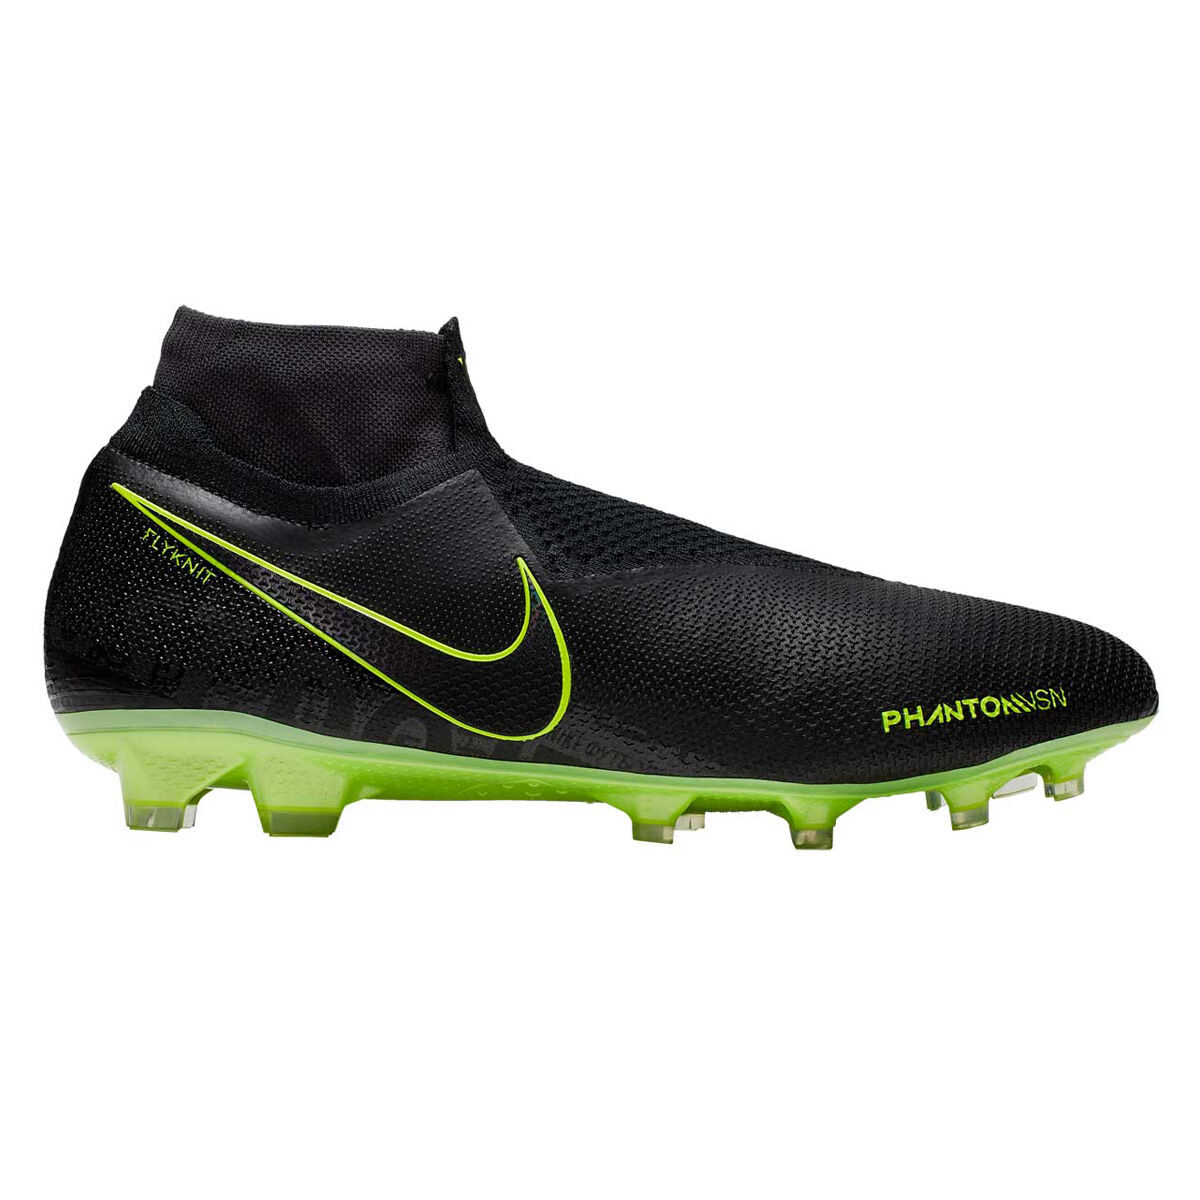 nike football shoes without studs